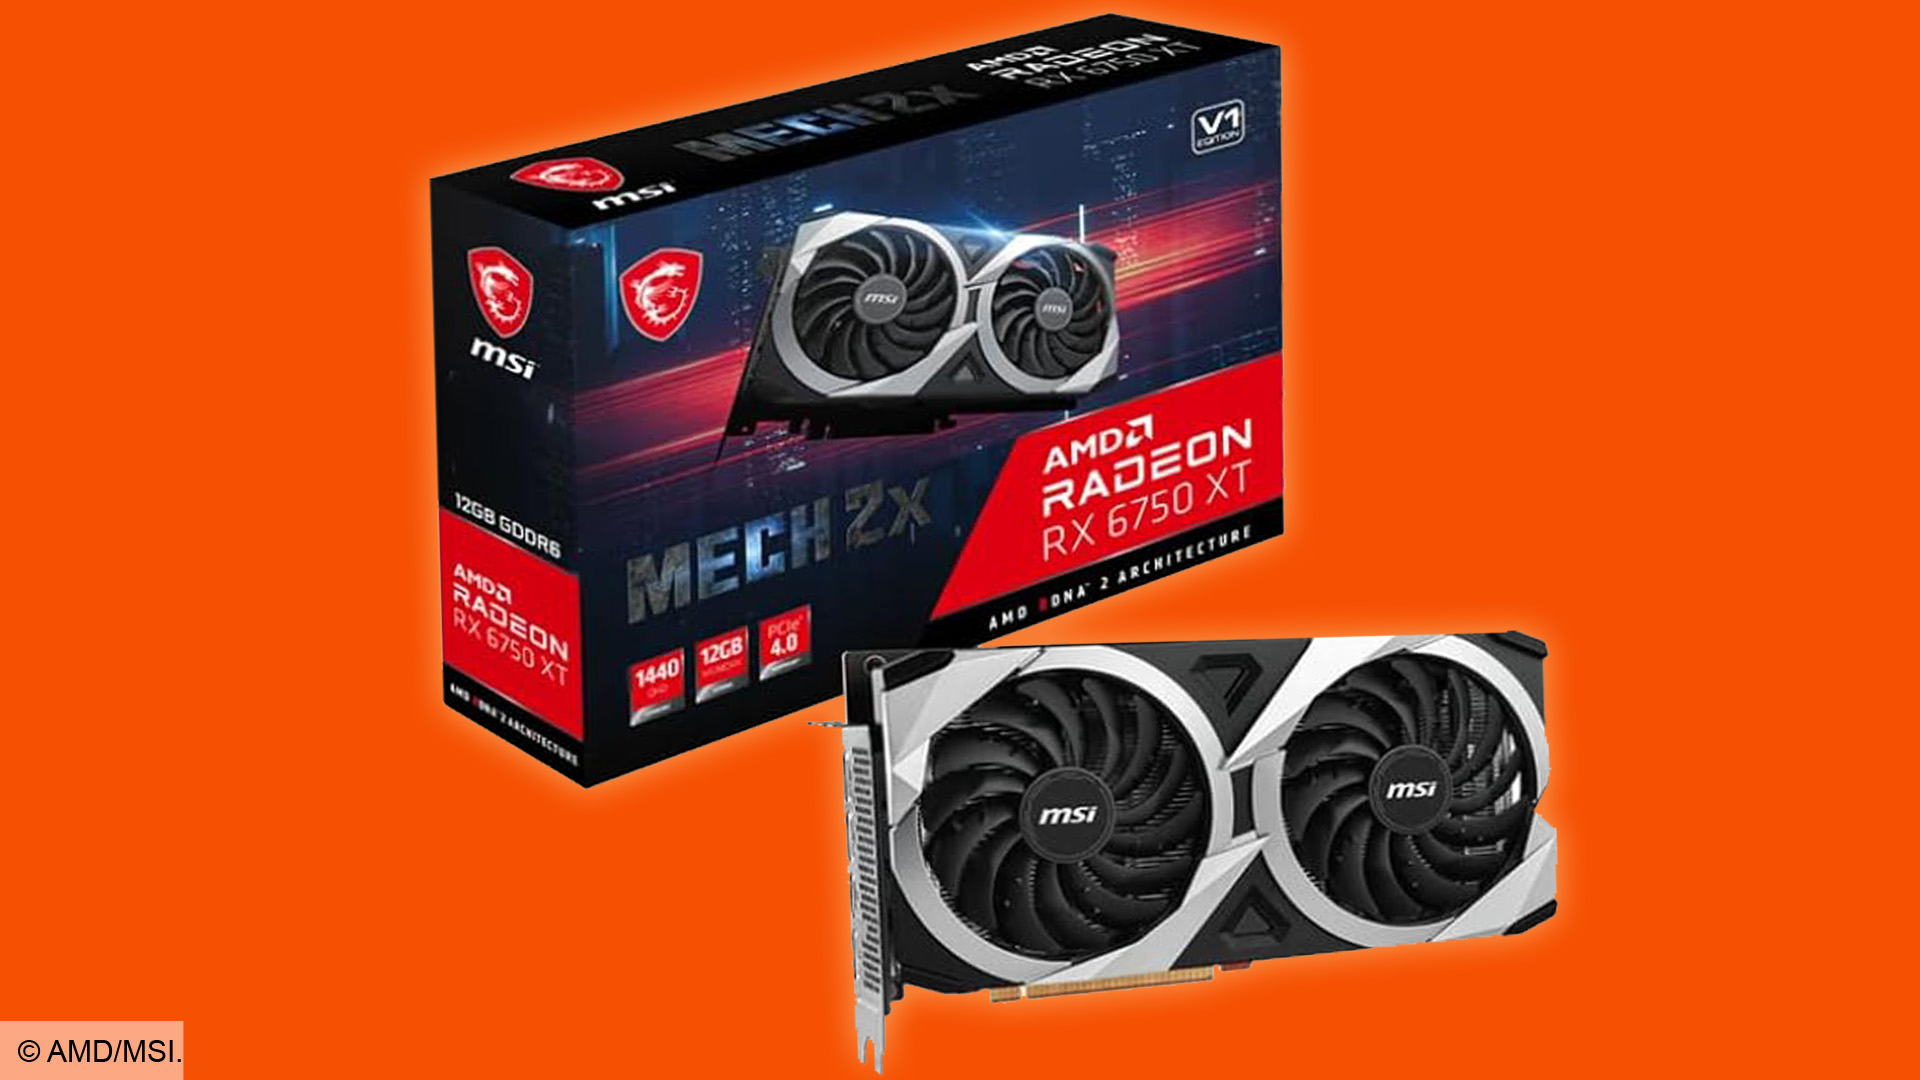 Grab the AMD Radeon RX 6750 XT for its lowest ever price on